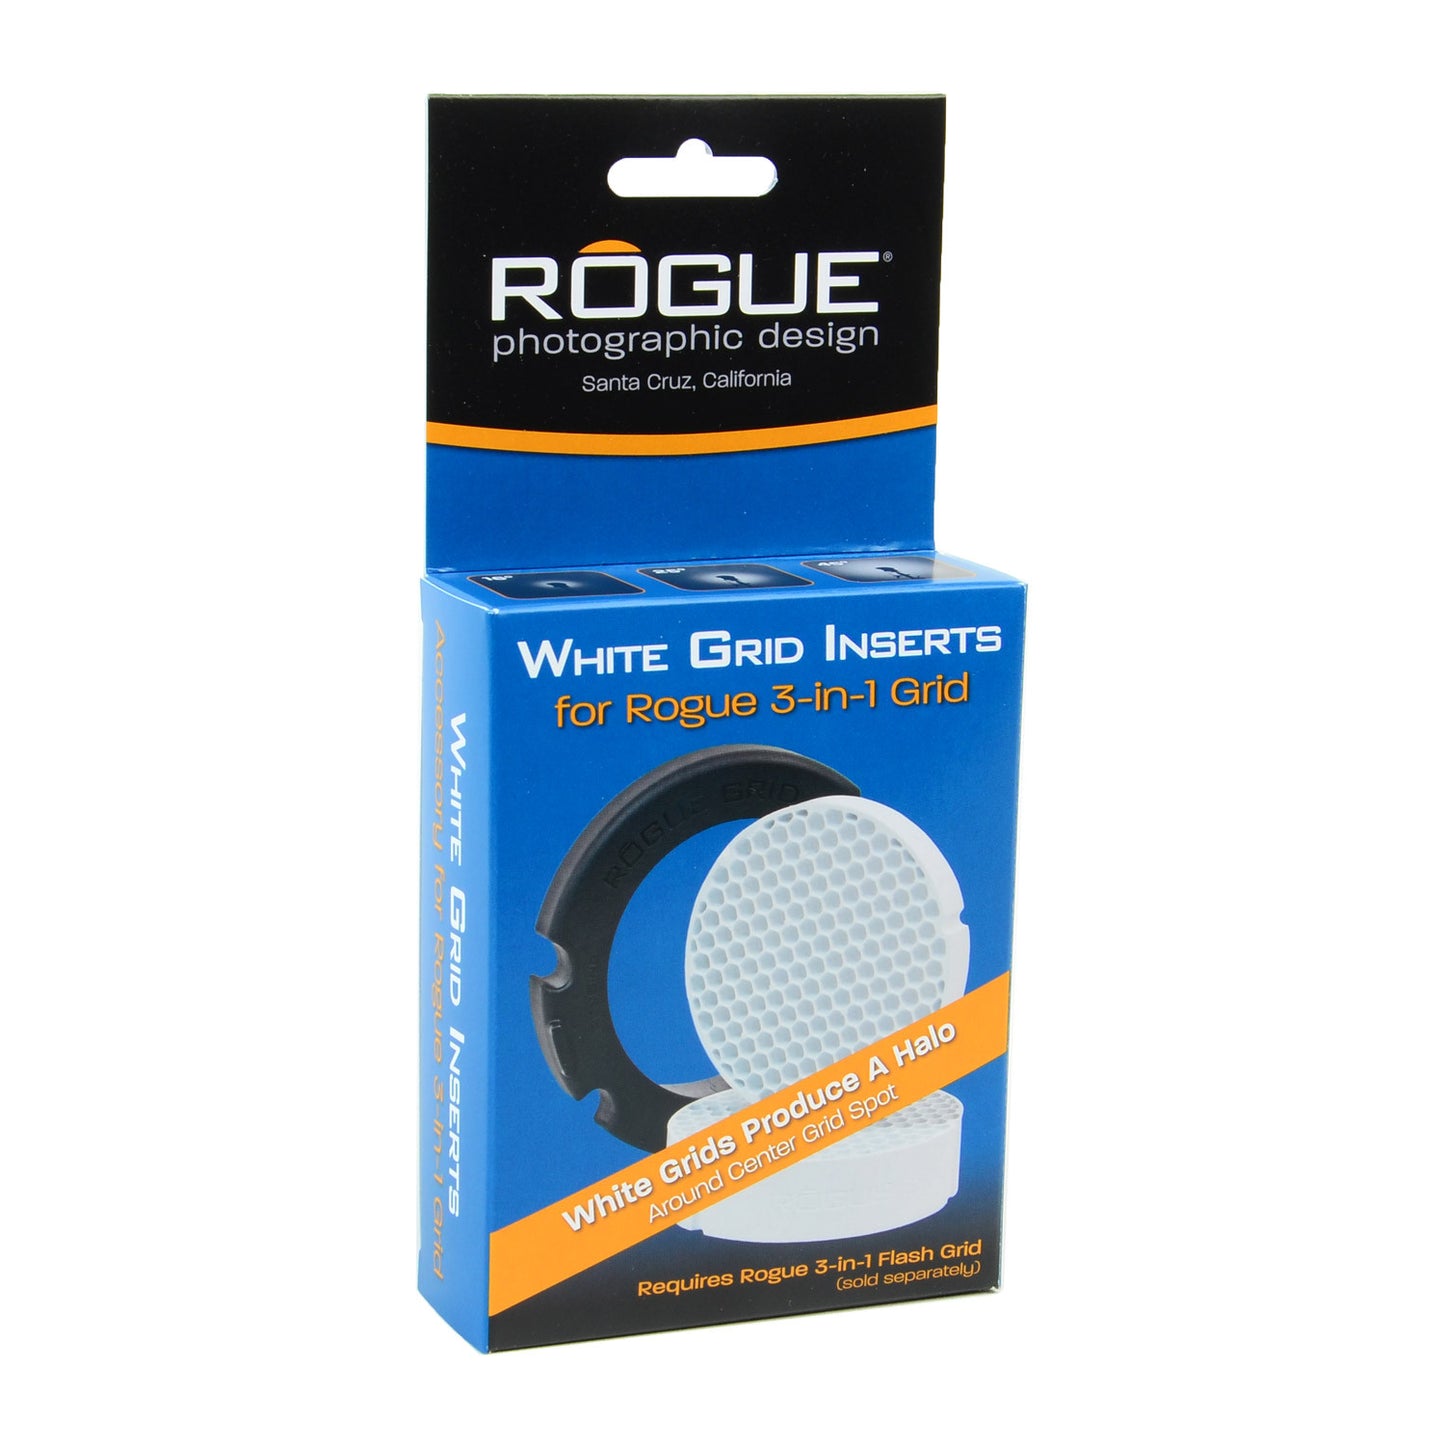 White Grid Inserts for Rogue 3-in-1 Grid – Rogue Photographic Design